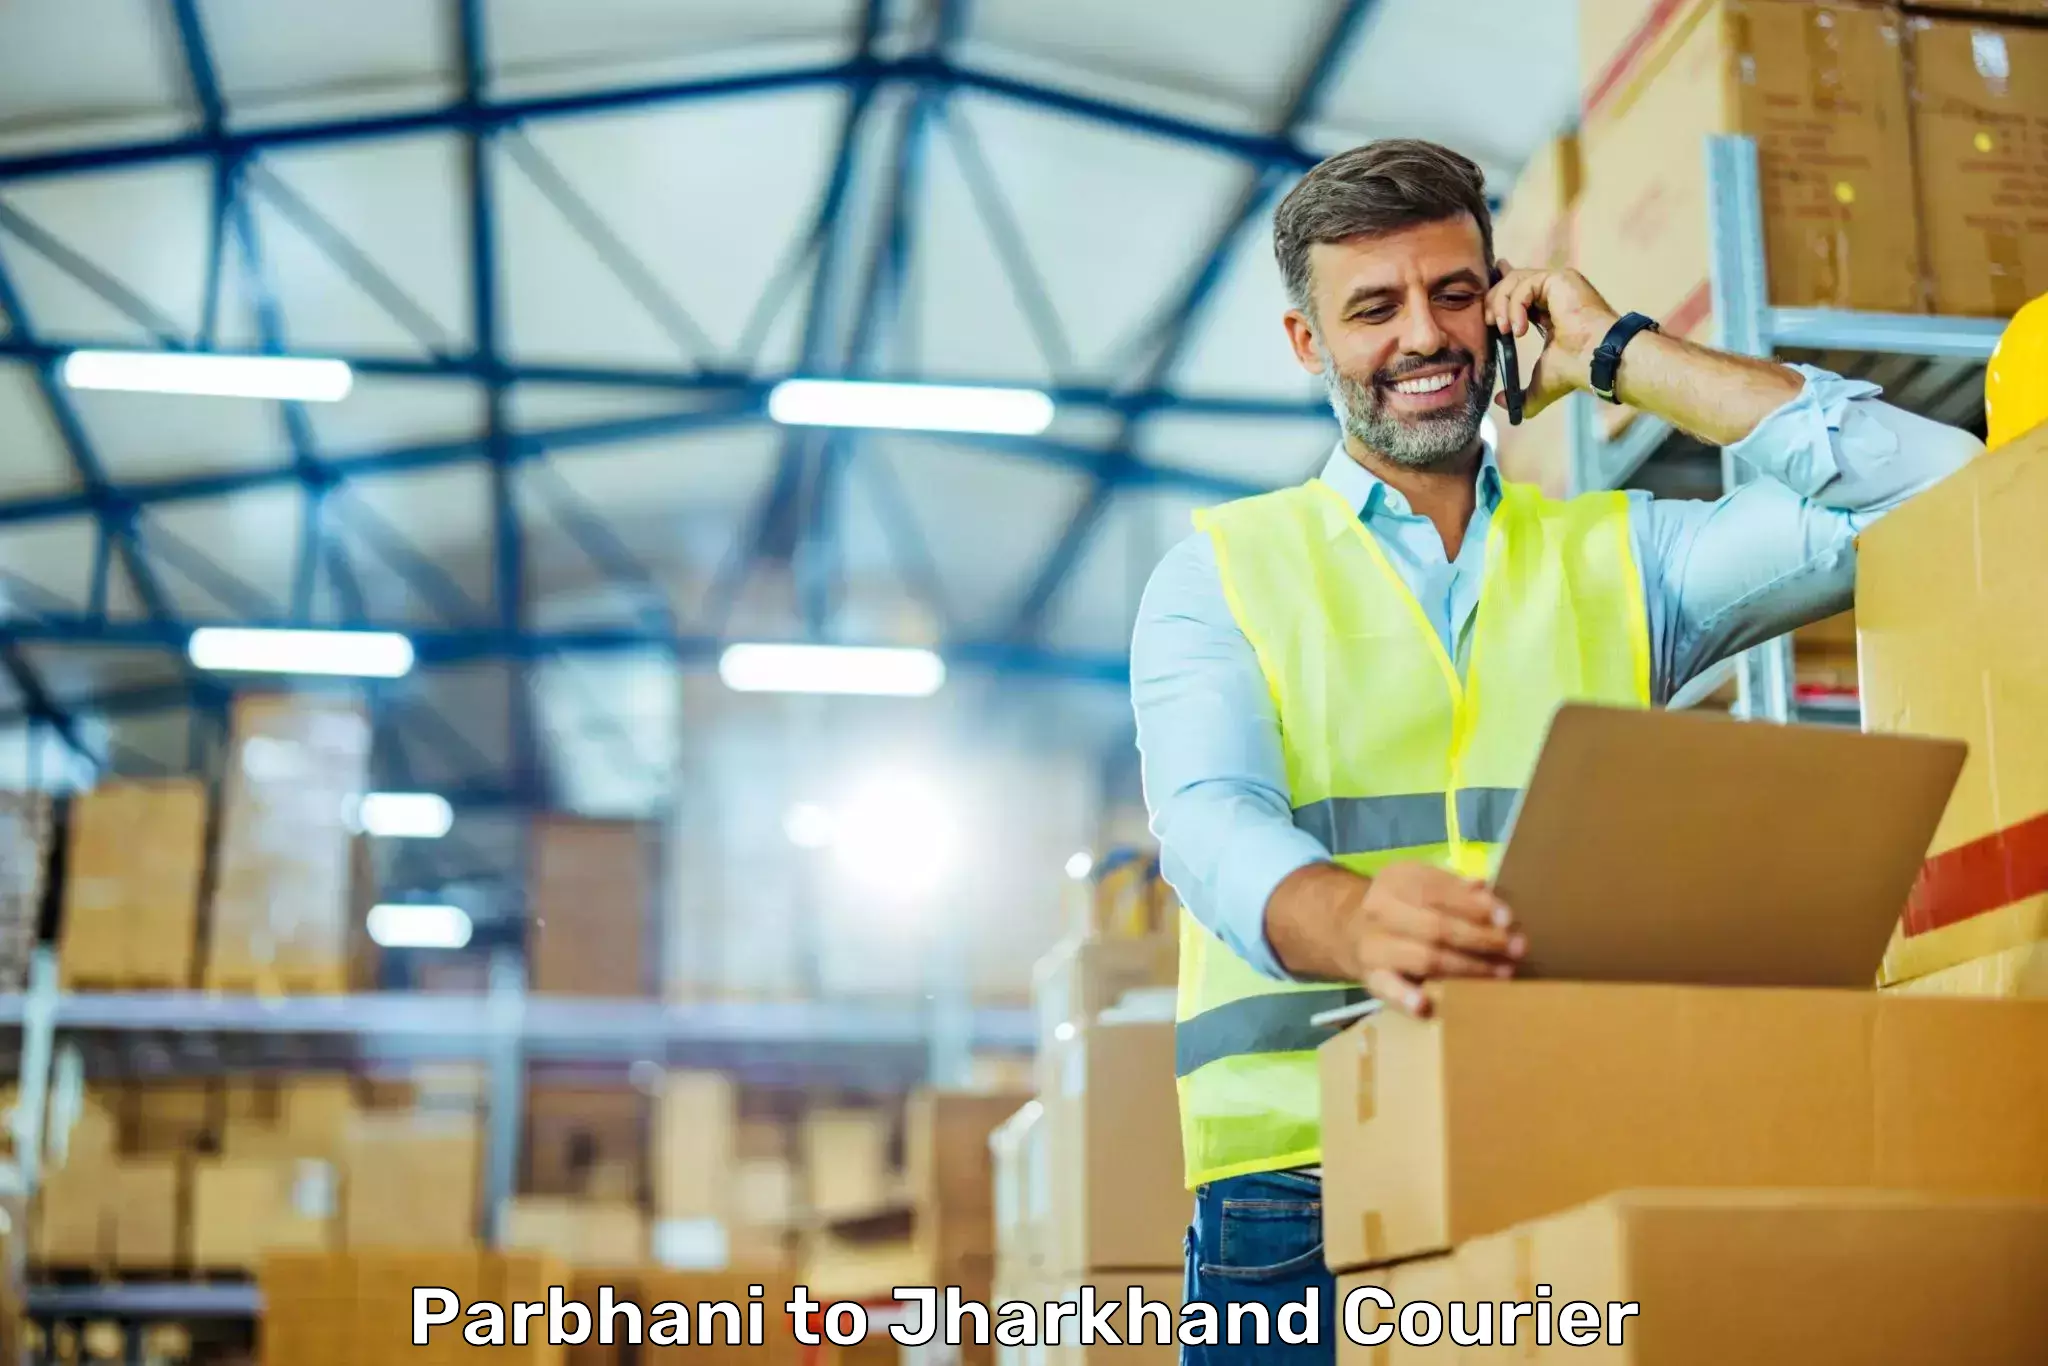 Courier service booking Parbhani to Kedla